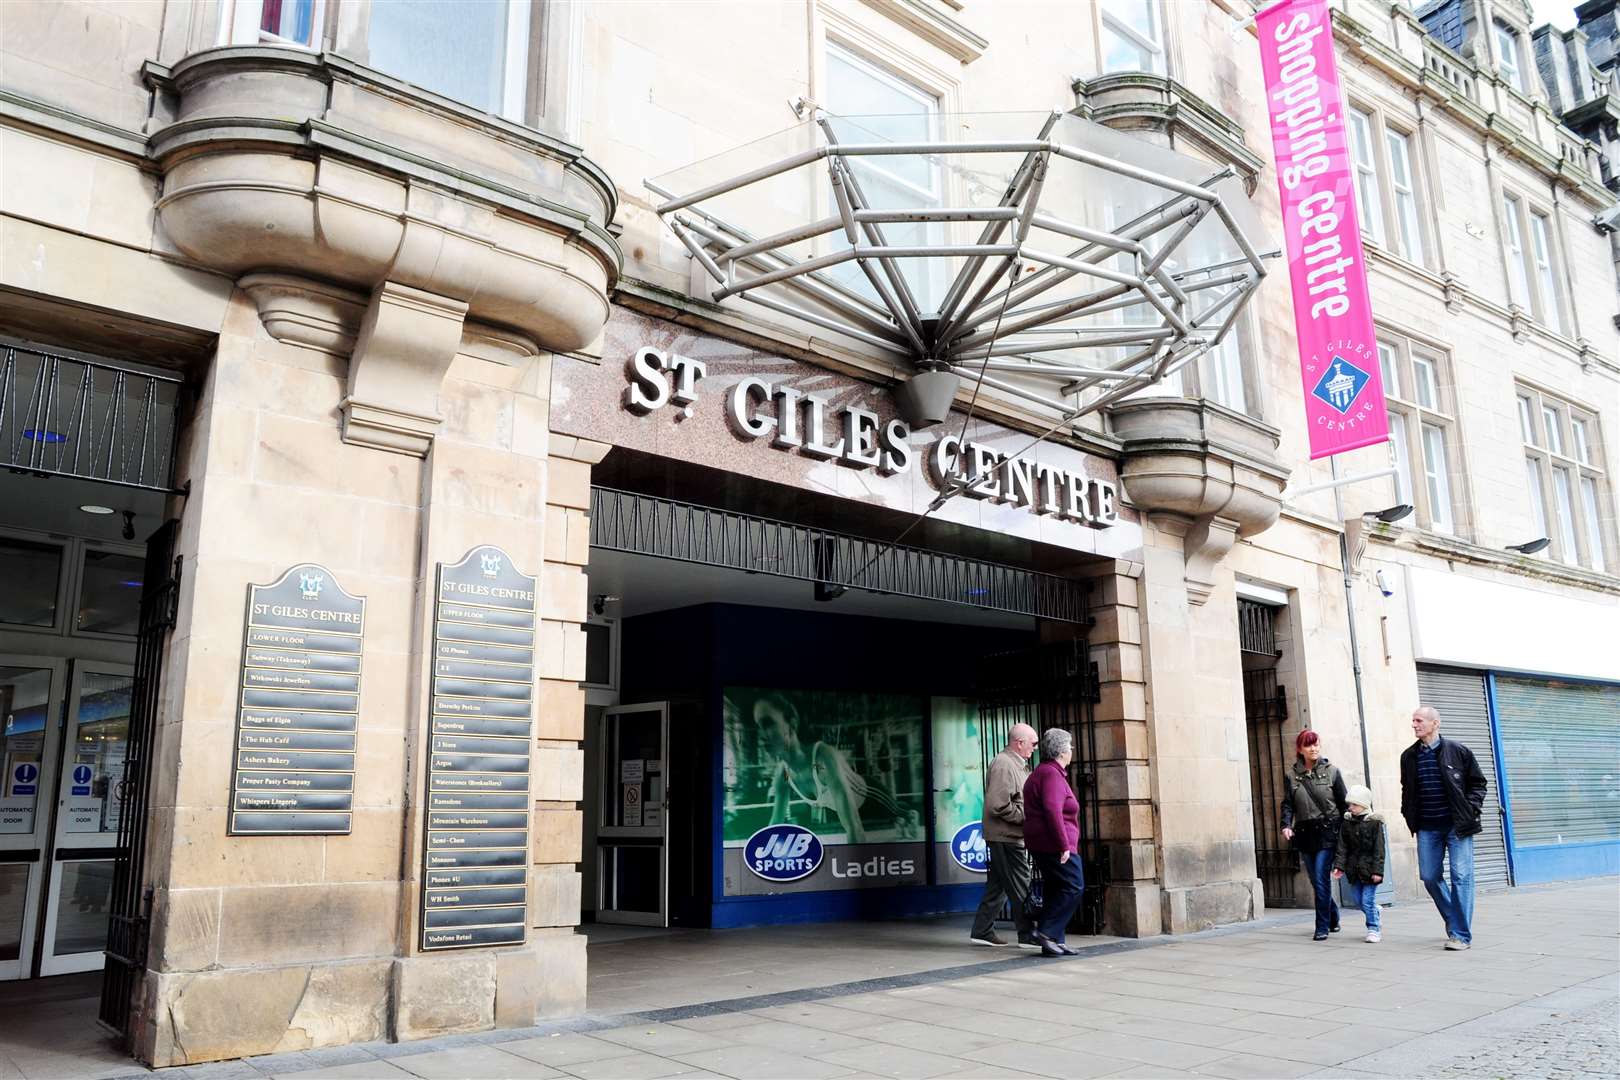 Elgin's St Giles Centre pictured before the lockdown